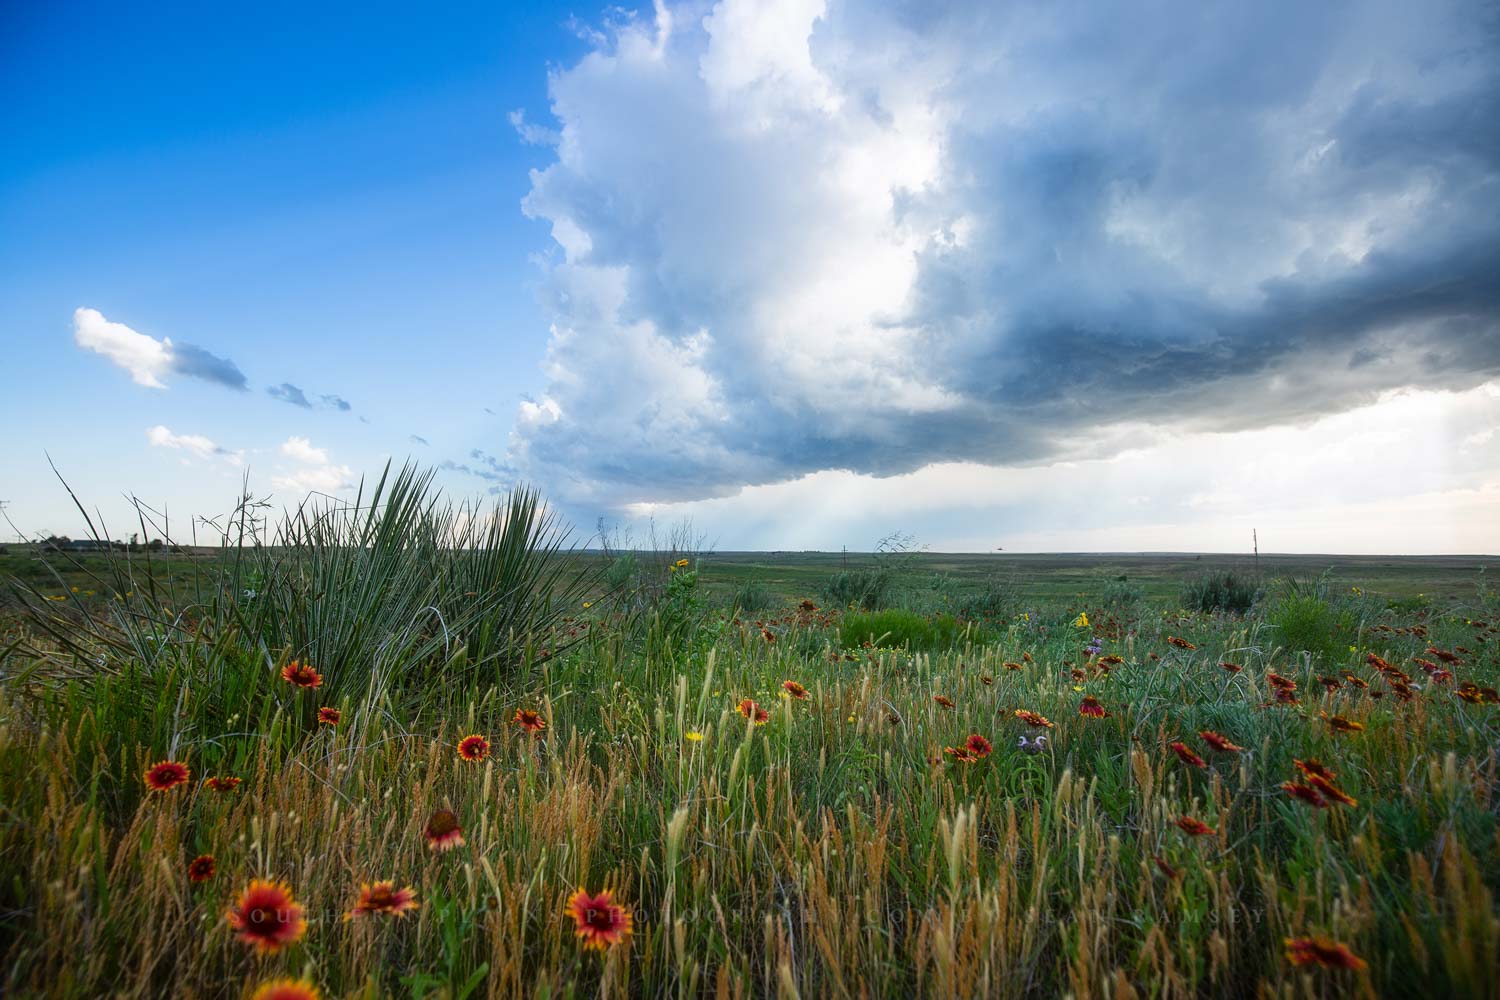 A thunderstorm moves over prairie wildflowers on a spring day in the Texas panhandle.